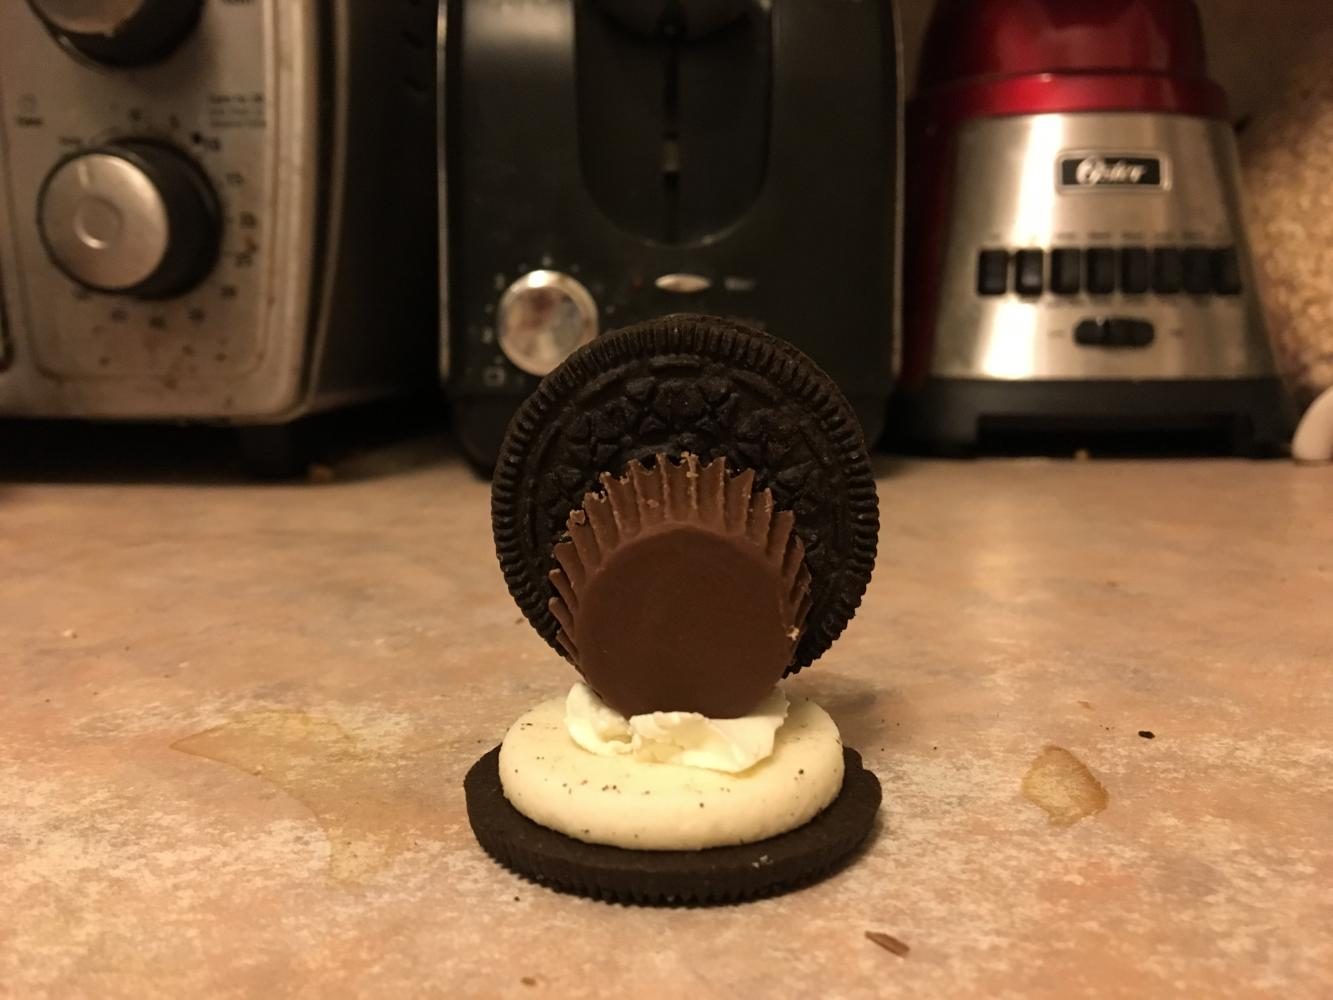 Step 3. Attach another Oreo cookie to the wide base of the peanut butter cup. 